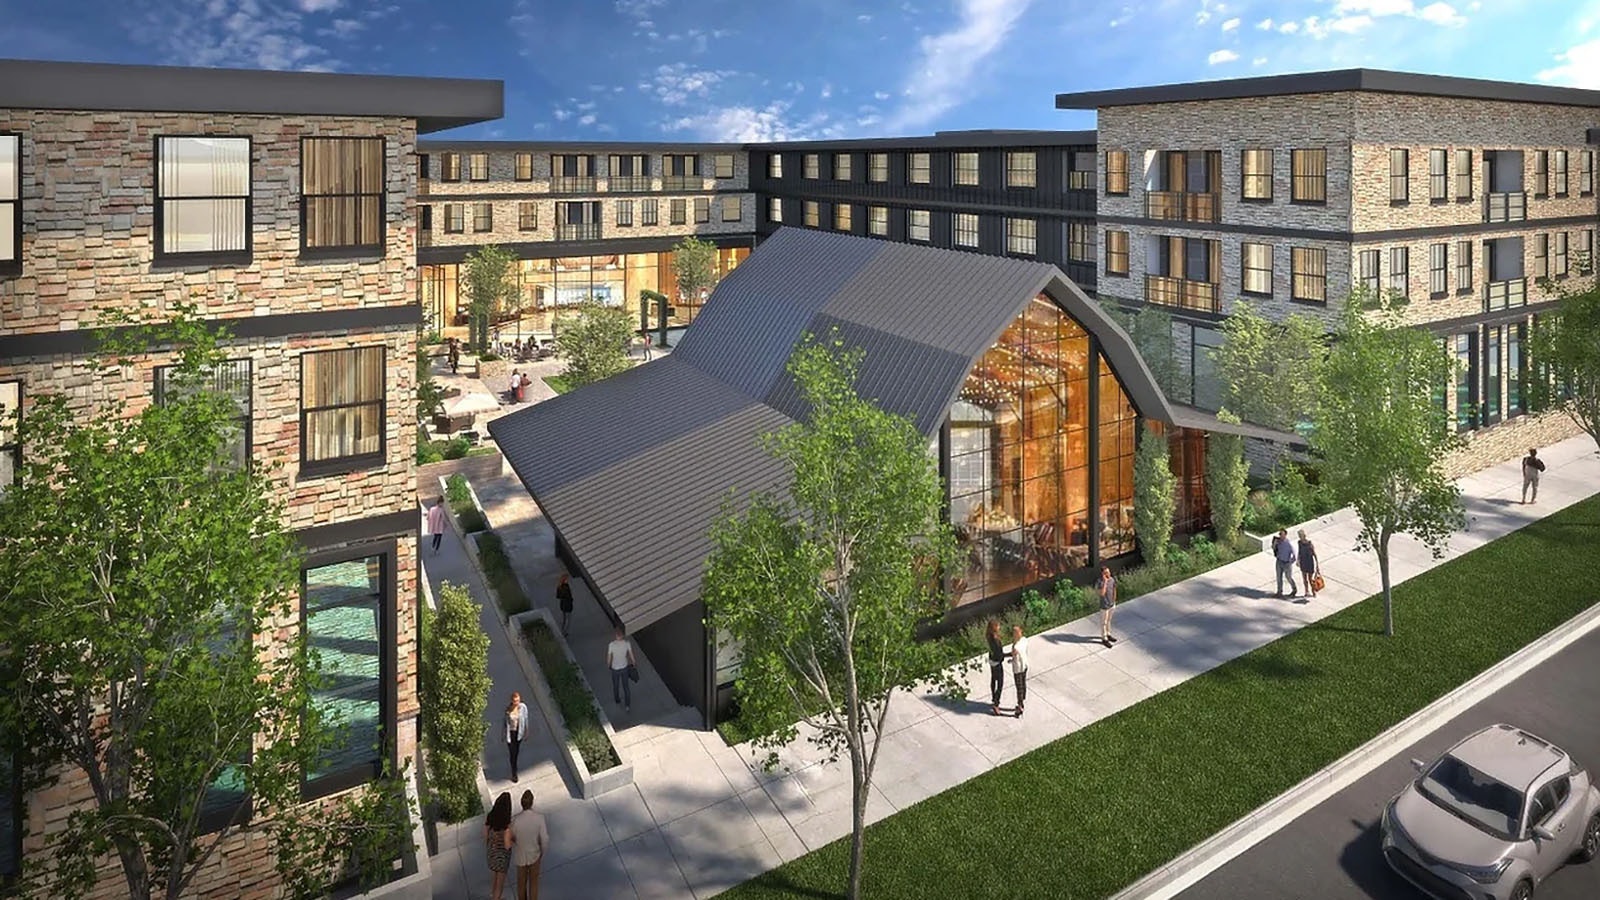 Anb illustration of the massive hotel development Mogul Capital has proposed for downtown Jackson, Wyoming.